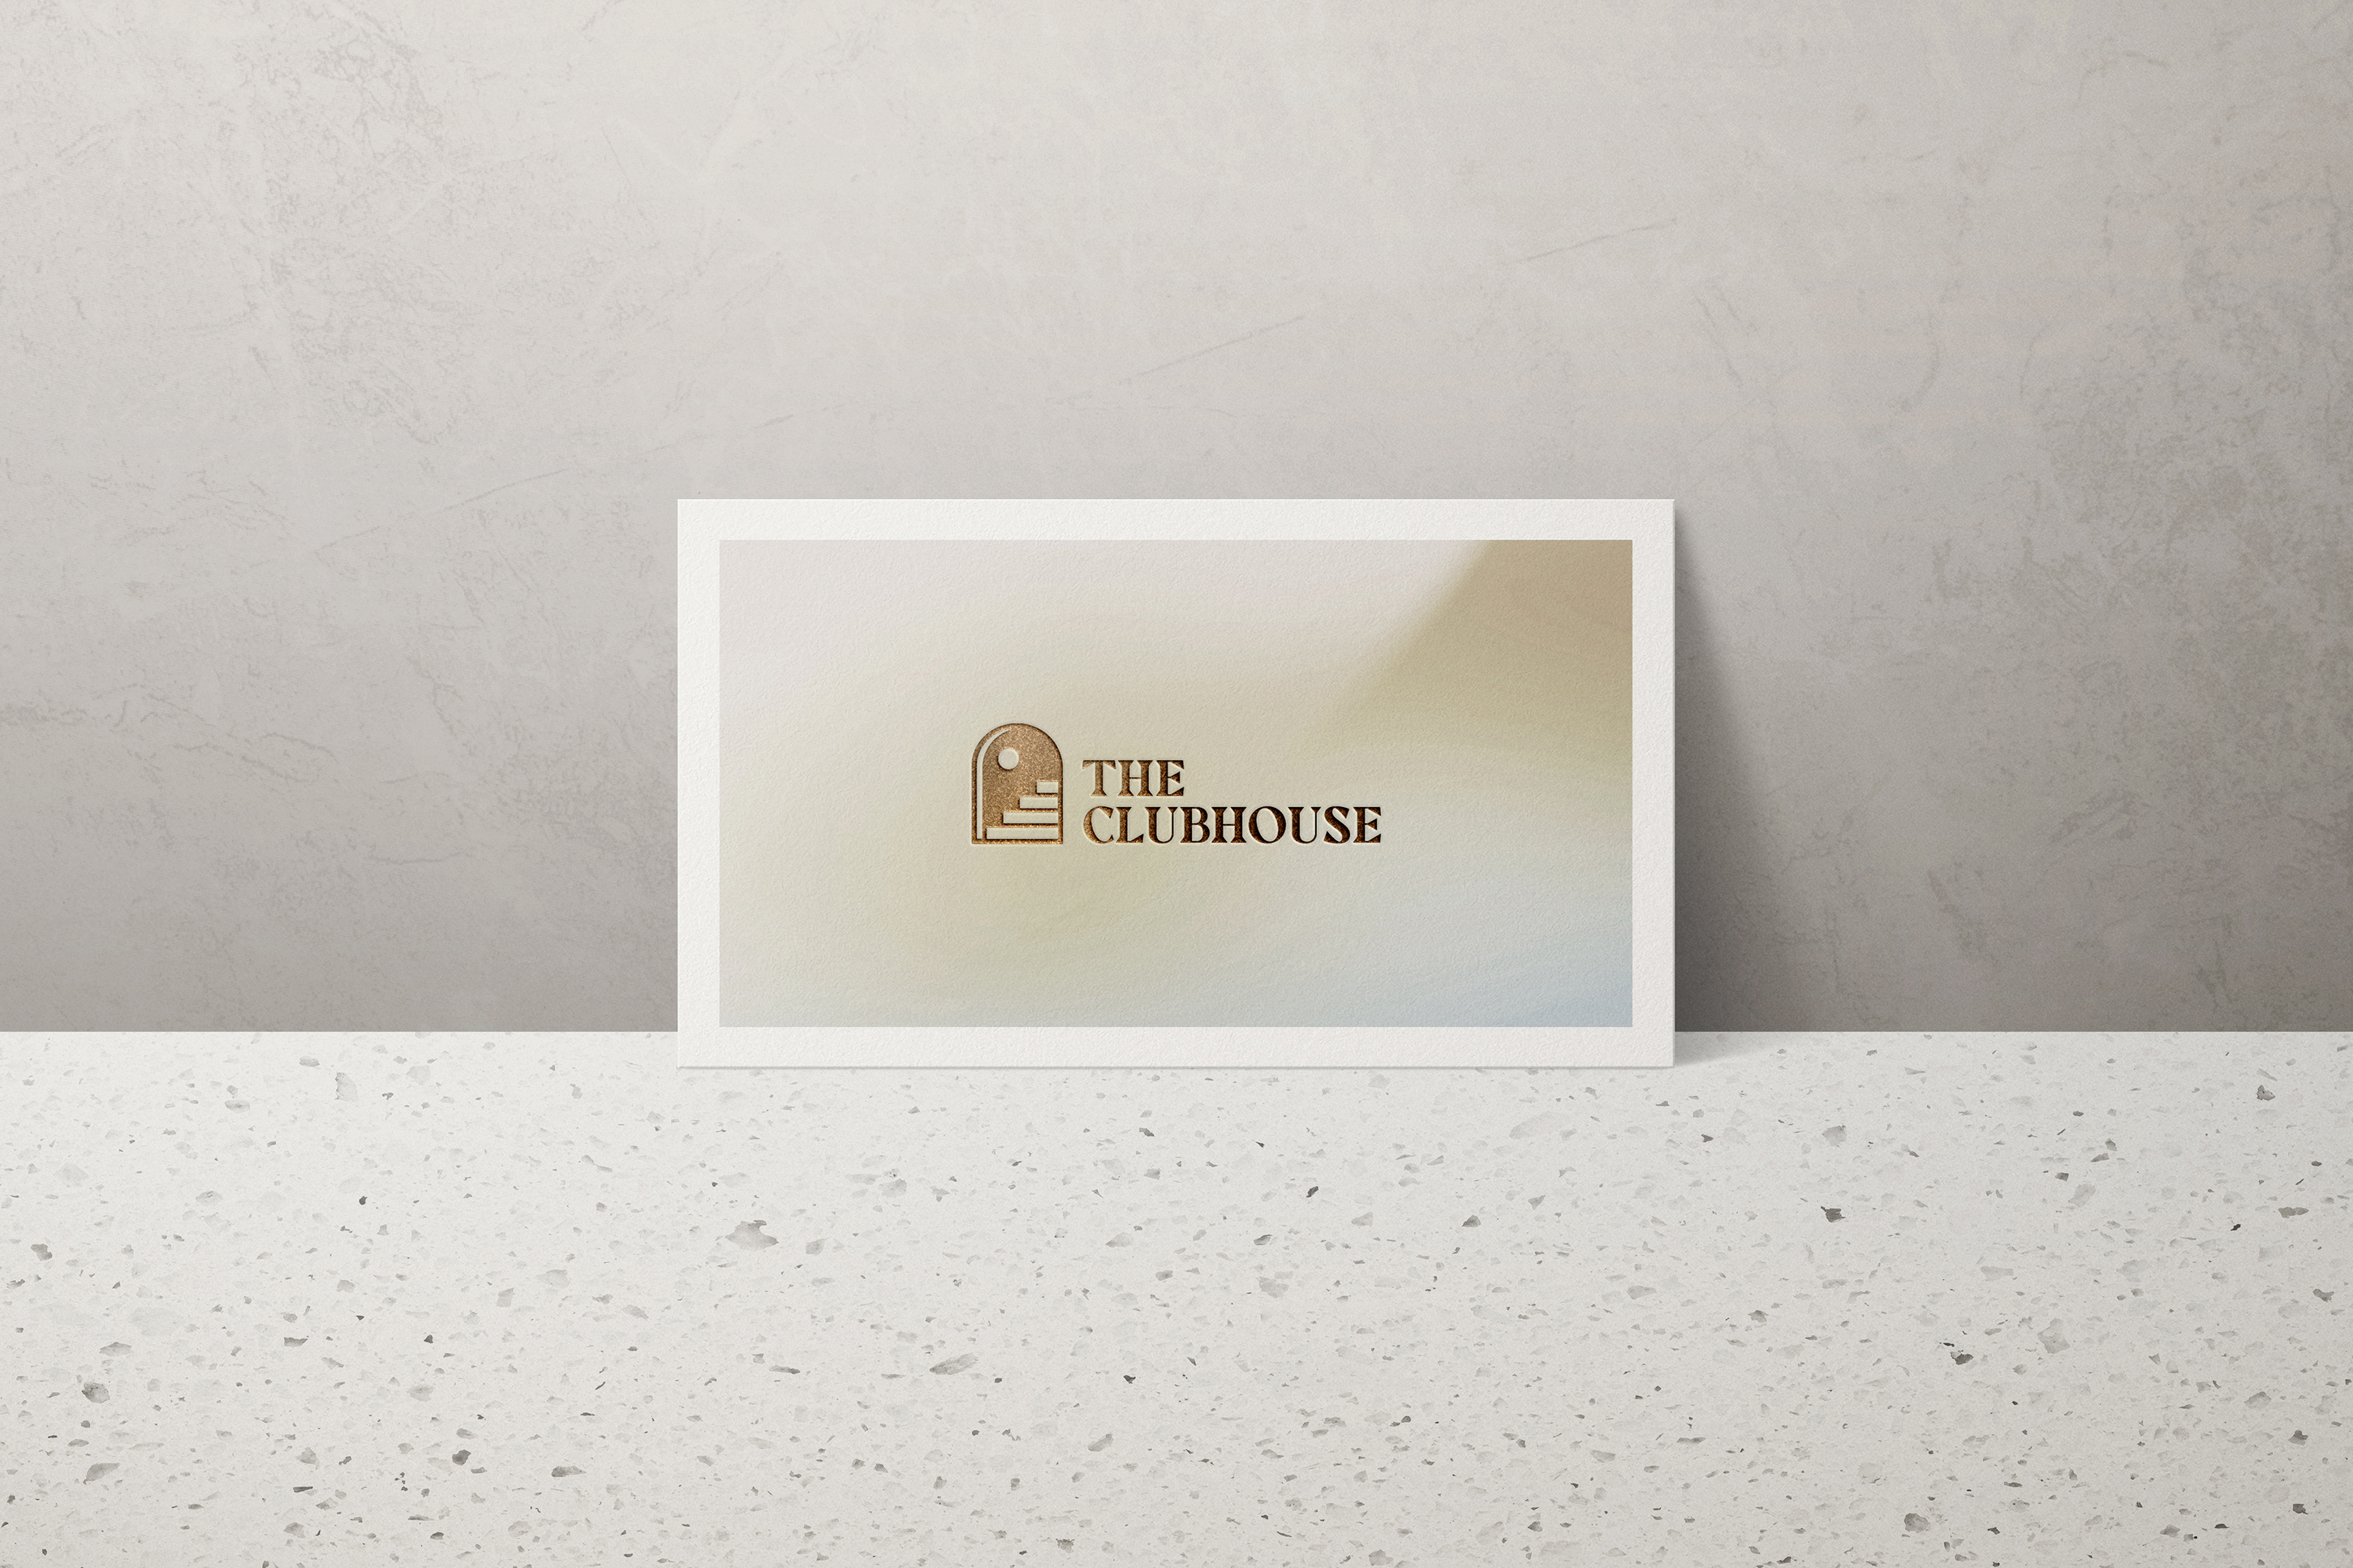 The front of The Clubhouse business card leaning on a grey wall